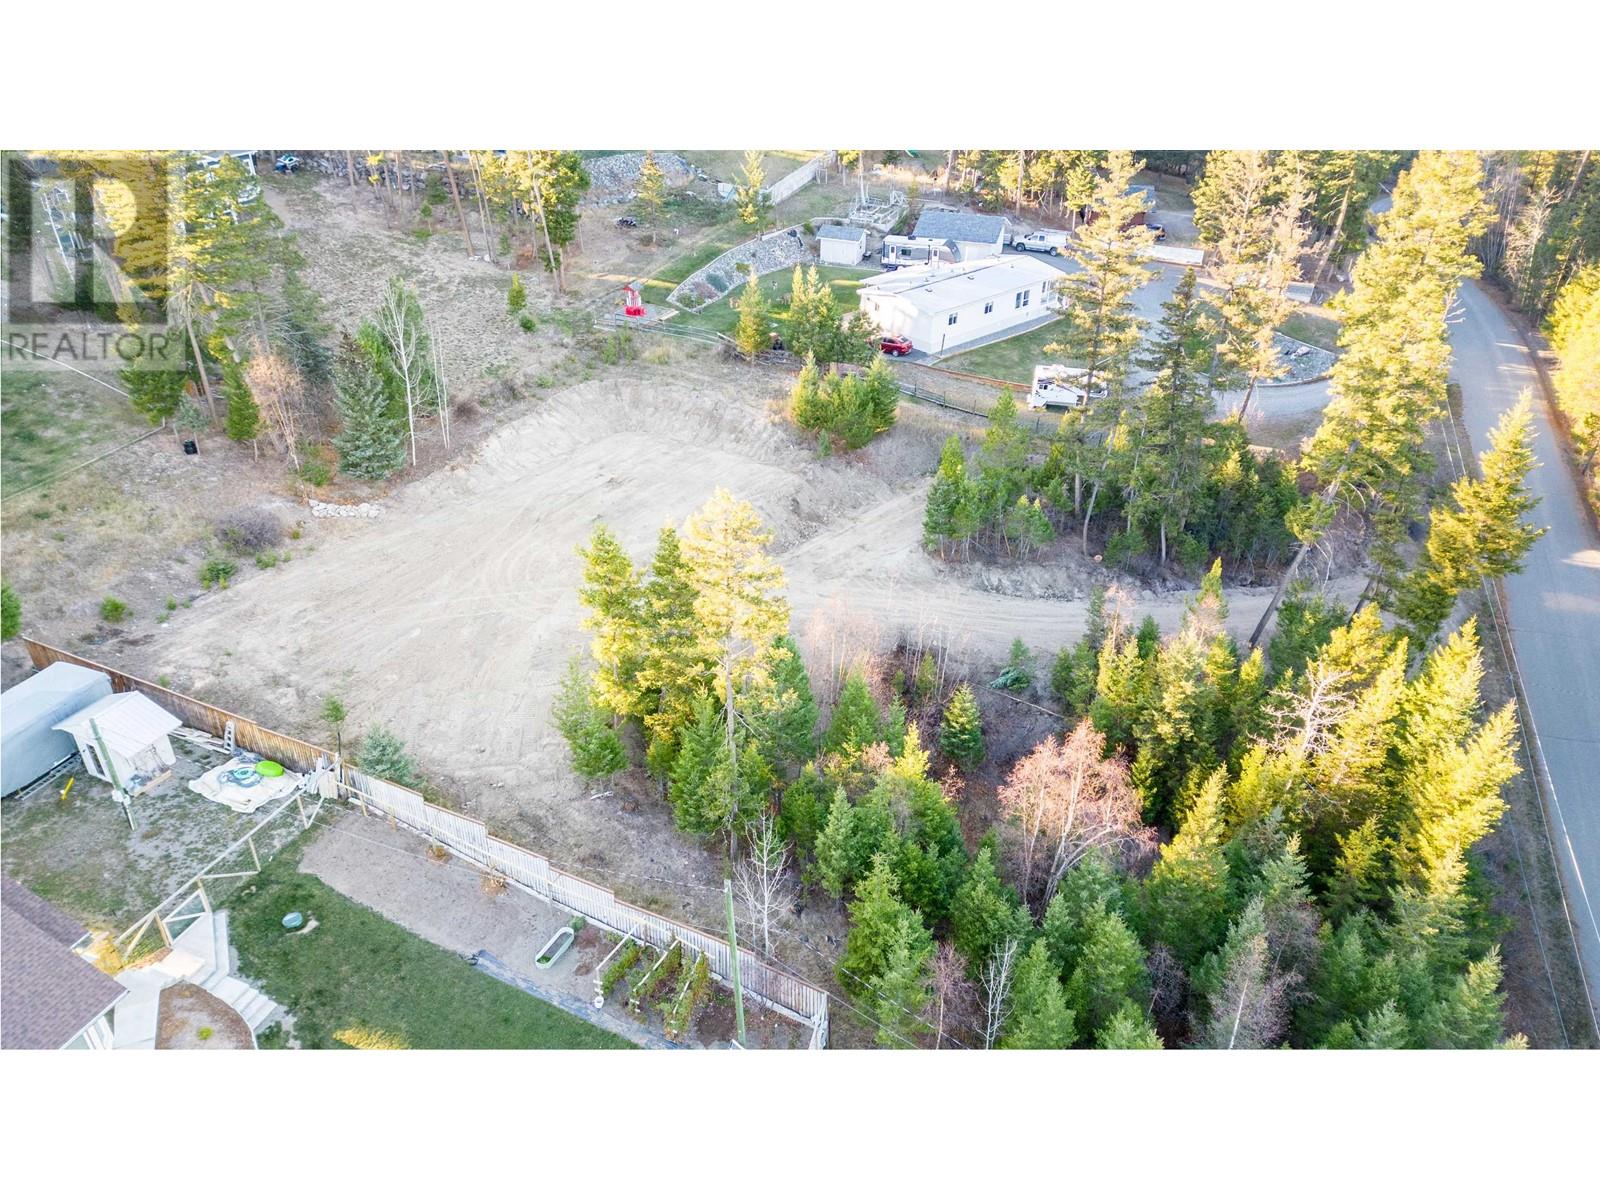 4858 STEWART ROAD located in 108 Mile Ranch, British Columbia